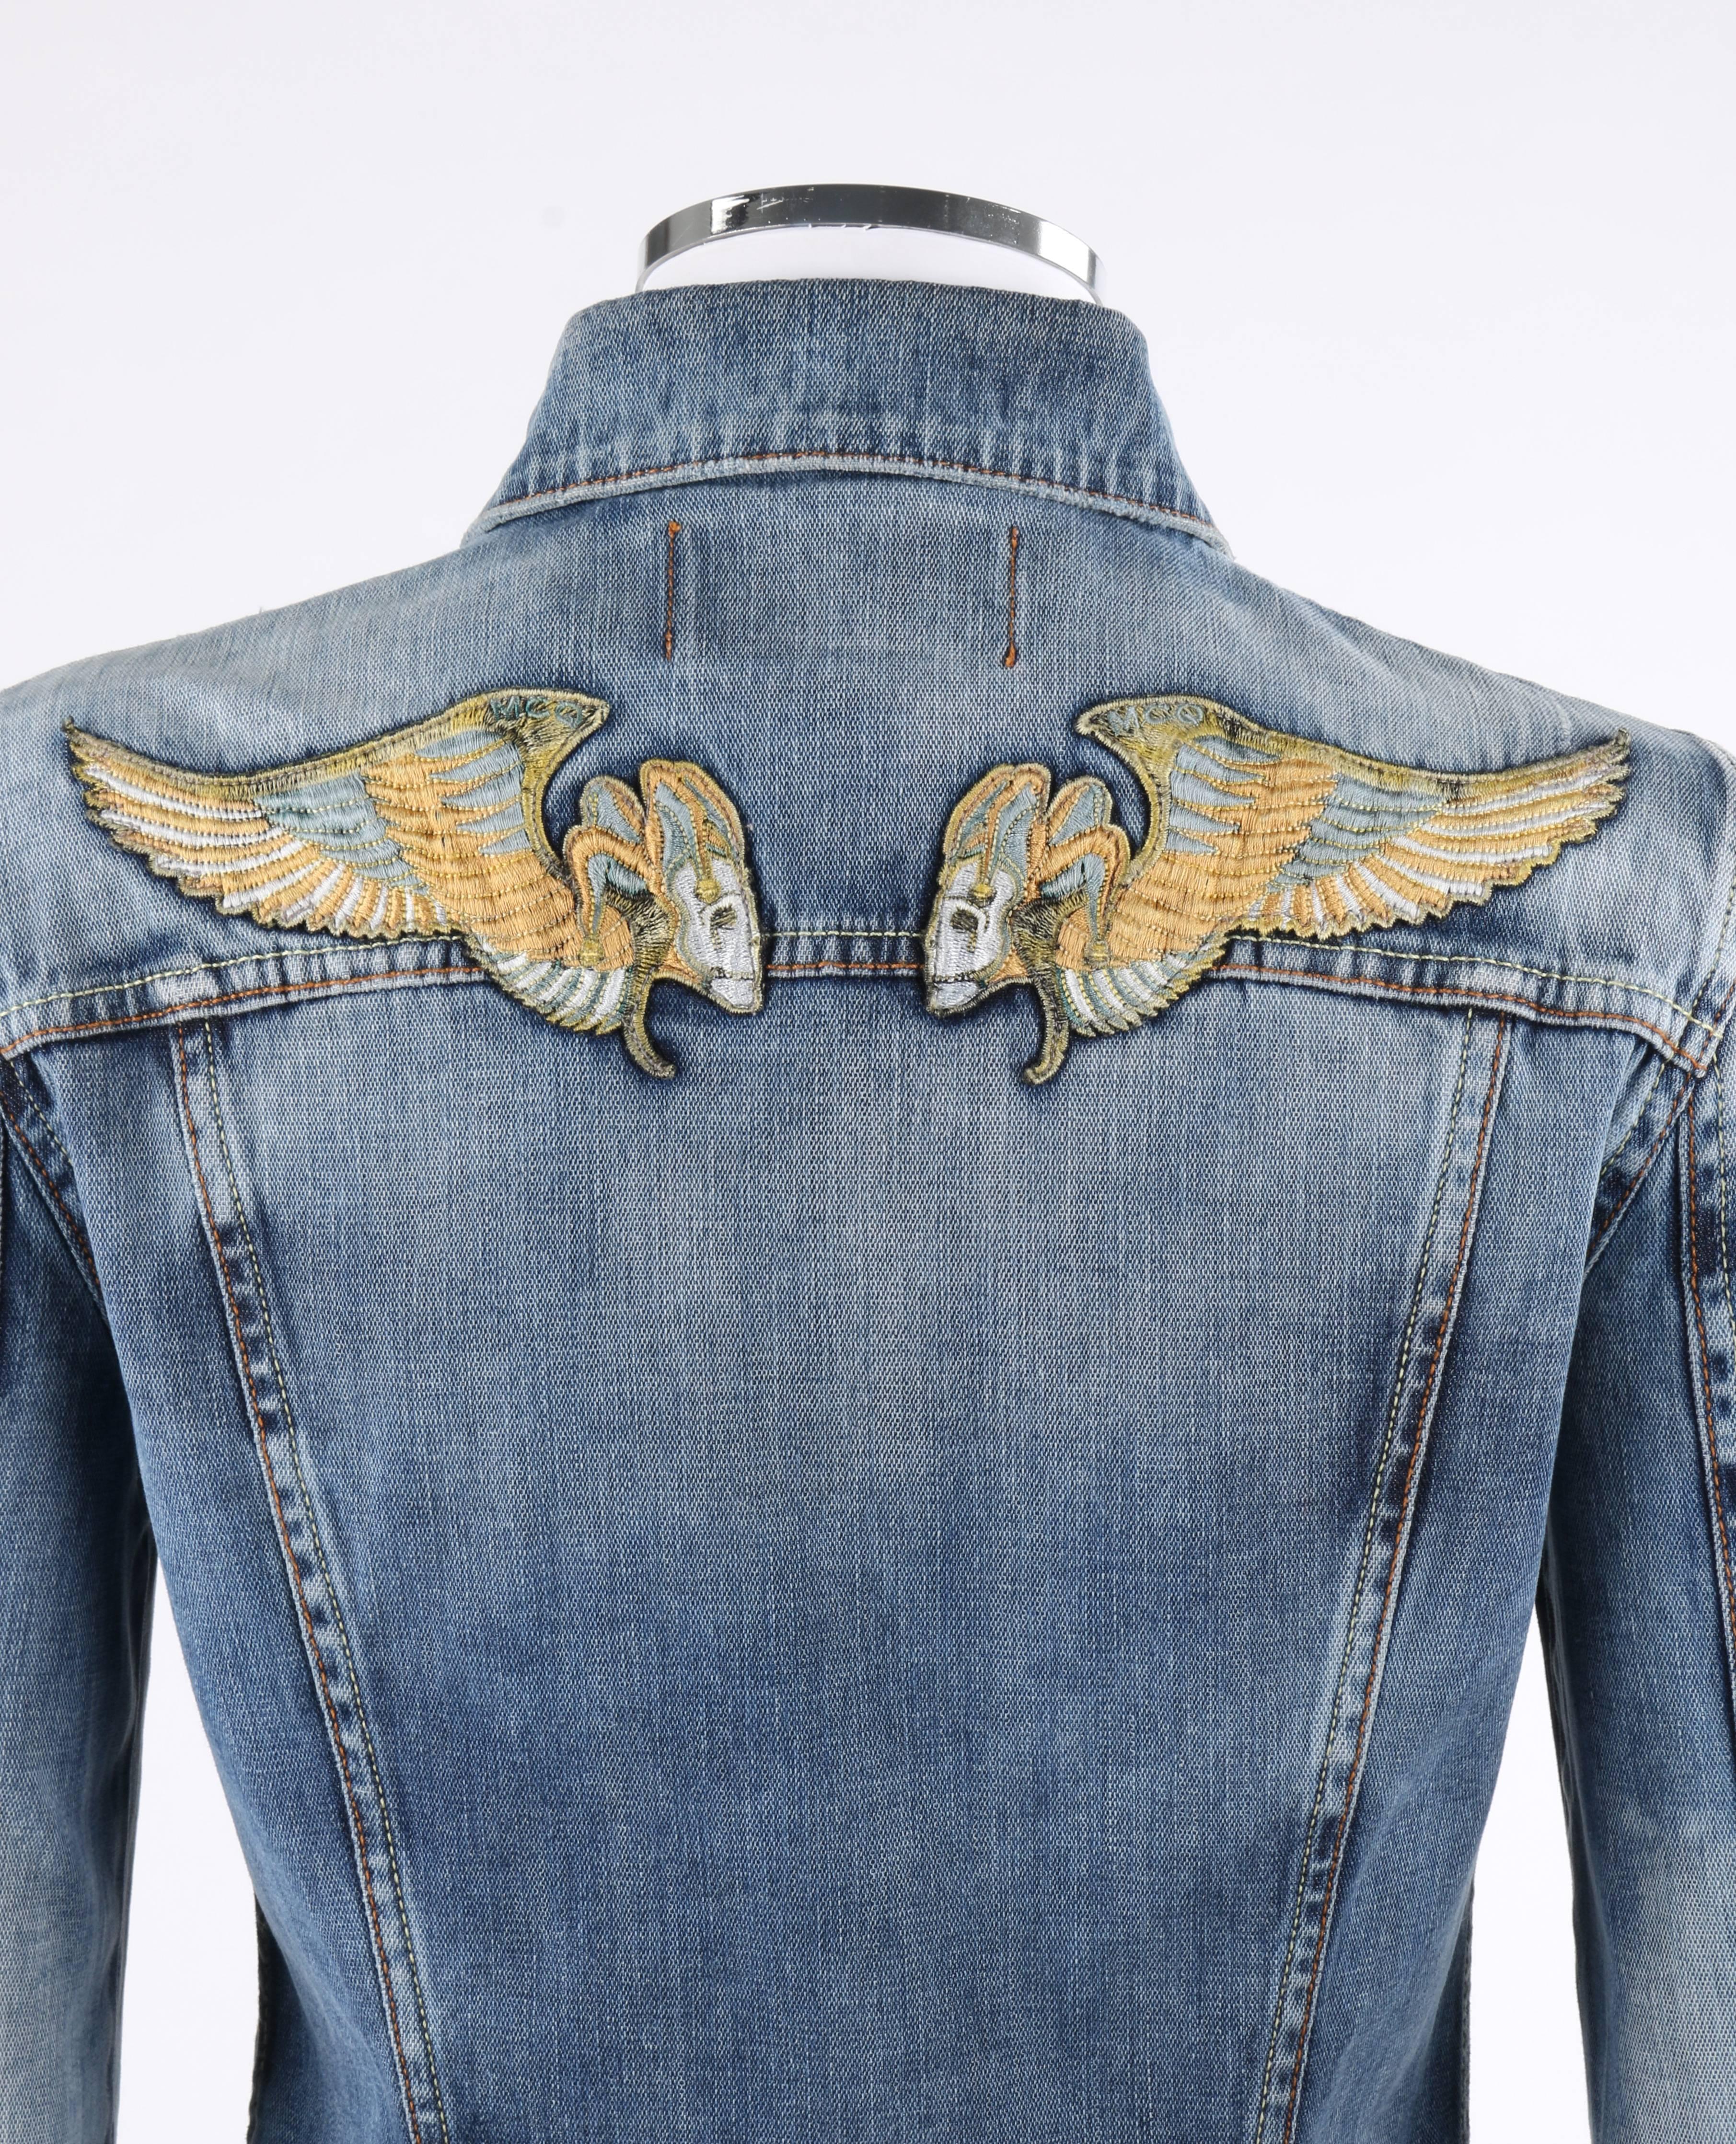 McQ by Alexander McQueen Pre-2010 cotton stone wash denim blue jean jacket with winged jester skull patches at top of back. McQ adaptation of the Angels and Demons recalled line. Bal collar. Pointed front yoke. 3/4 length sleeves with single button